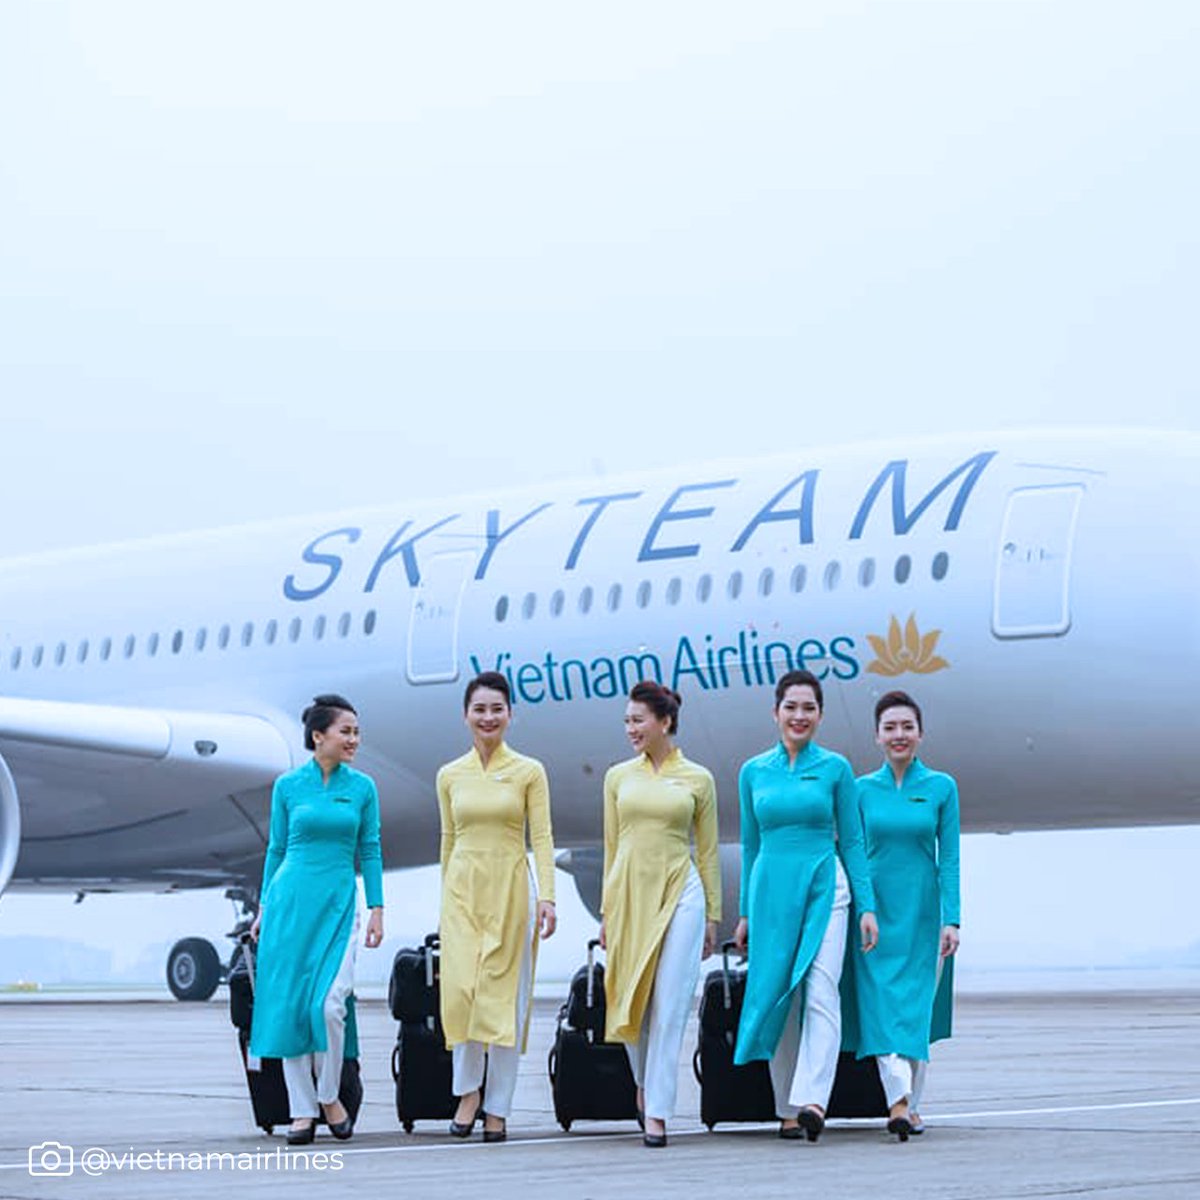 Vietnam Airlines is taking strides toward a greener future! 🌿✈️ With innovative steps like cutting out nylon bag use, introducing the eco-friendly PressReader app, and upgrading to fuel-efficient aircraft, they're on a mission to achieve net-zero emissions by 2050.#SkyTeam